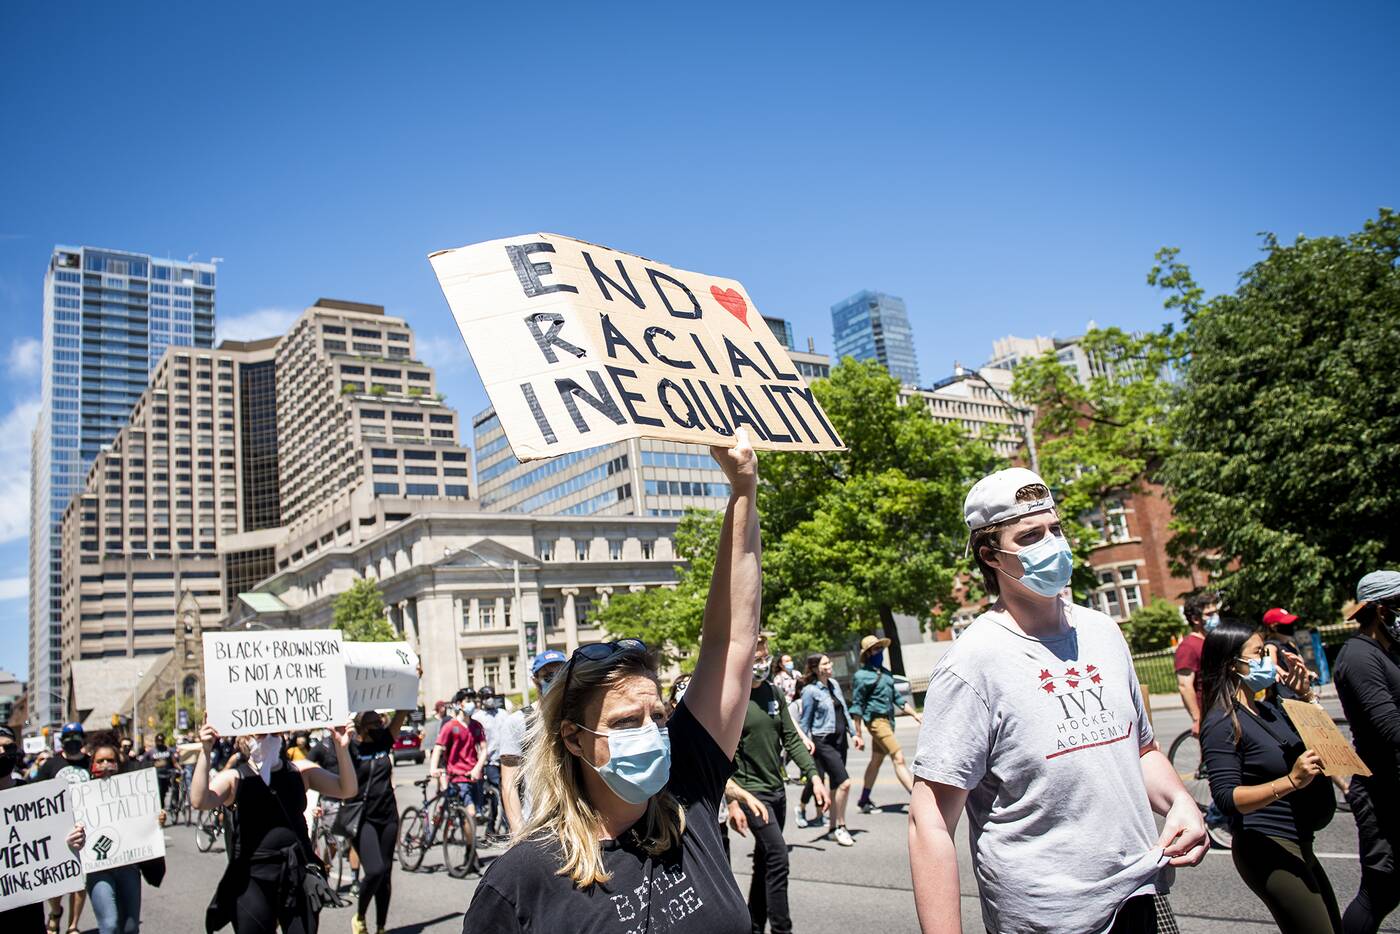 Hundreds marched in Toronto today against antiBlack racism